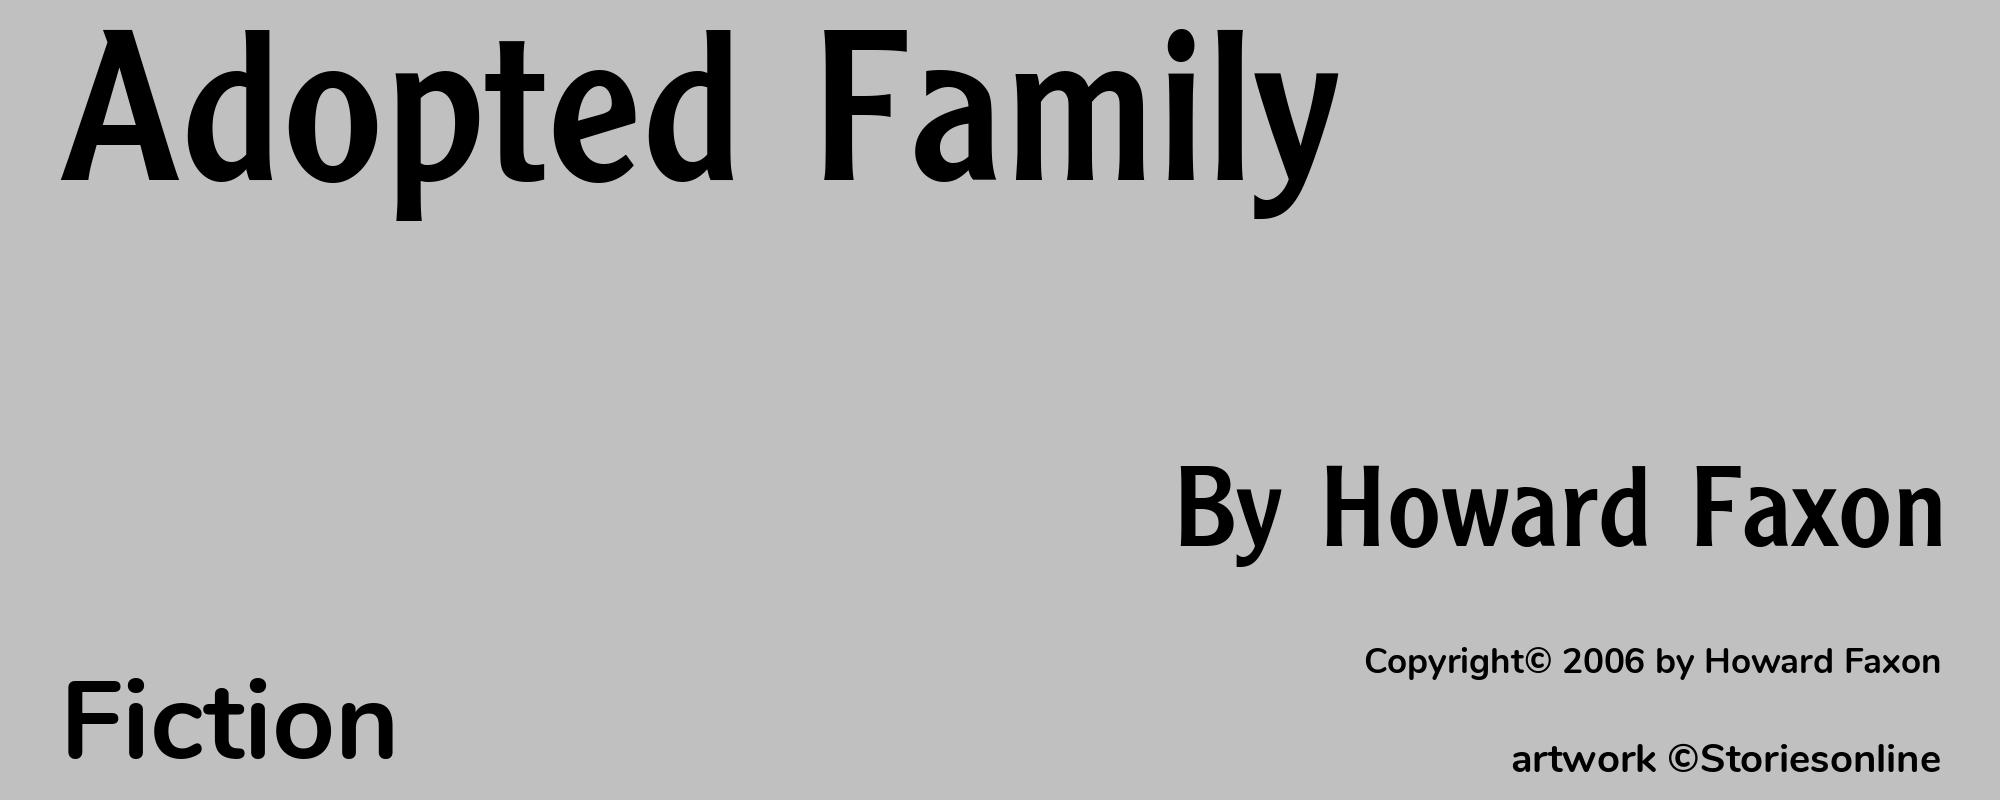 Adopted Family - Cover